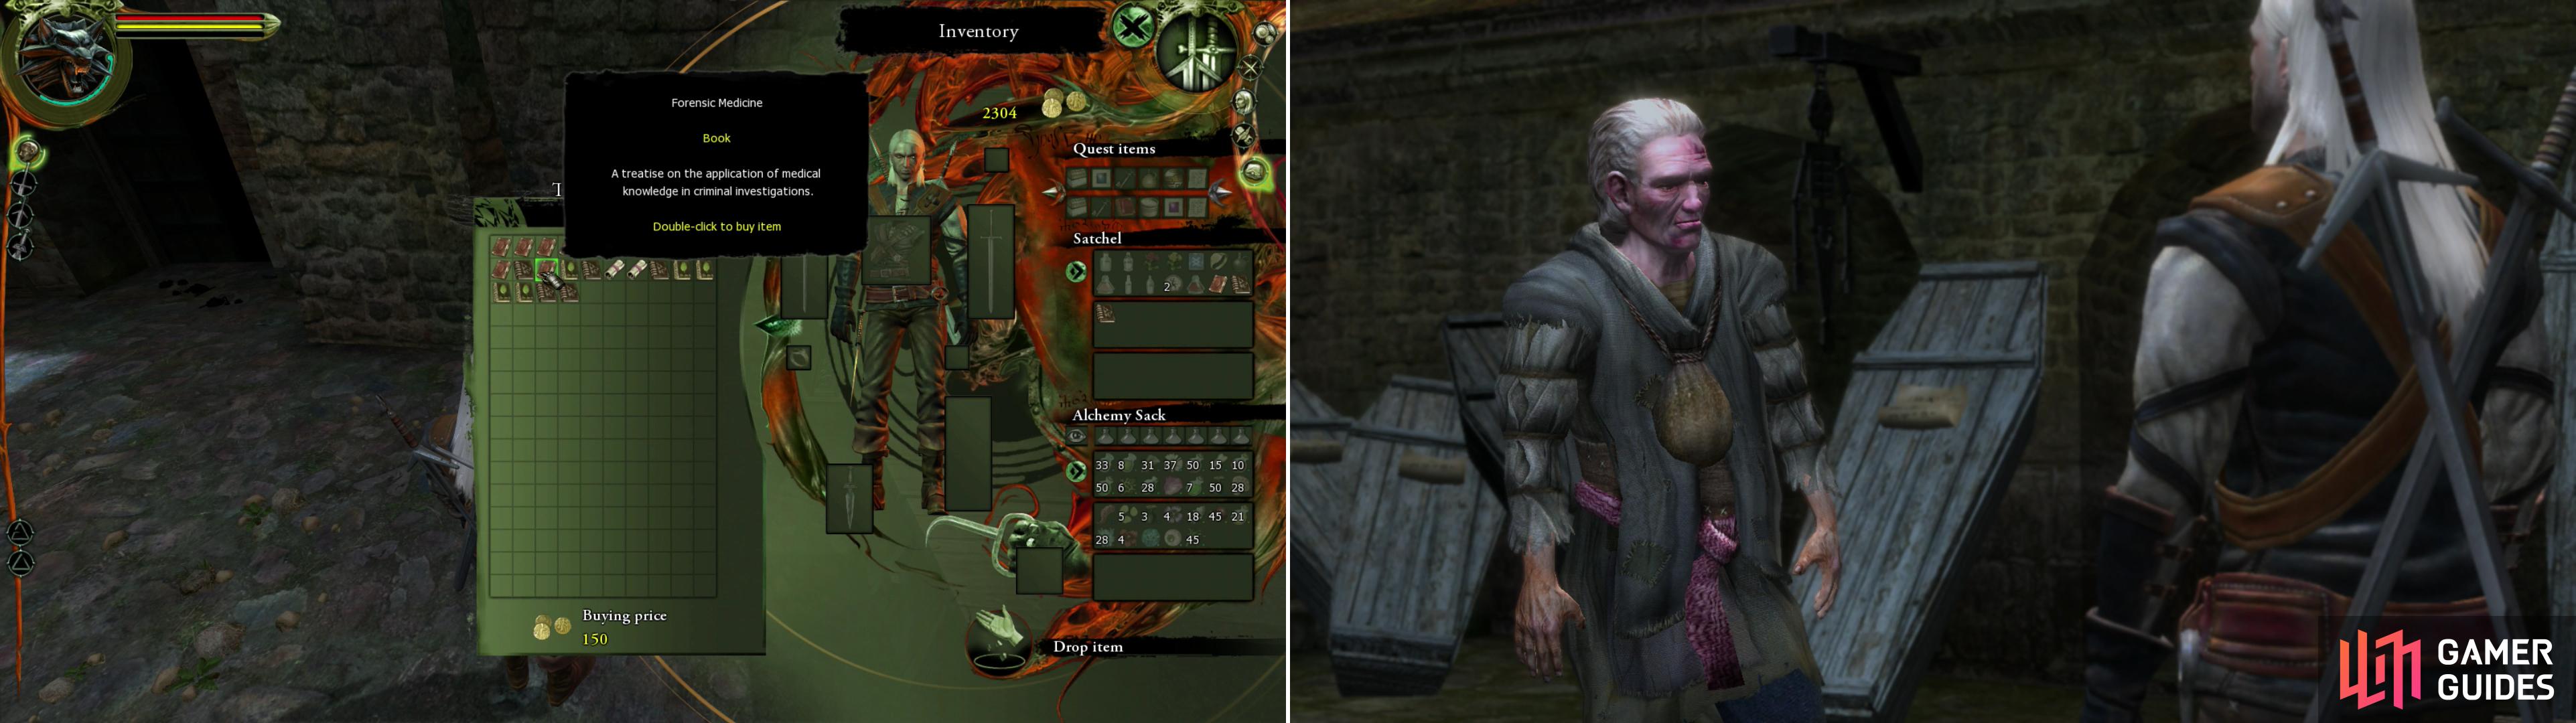 Knowledge is power-buying books from the Antiquarian will allow you to draw the correct conclusions during your autopsy (left). To gain access to the Cemetery-and the dead Salamanders body-youll need to bribe the Gravedigger with dwarven spirits and either get his debts canceled or go over his head (right).